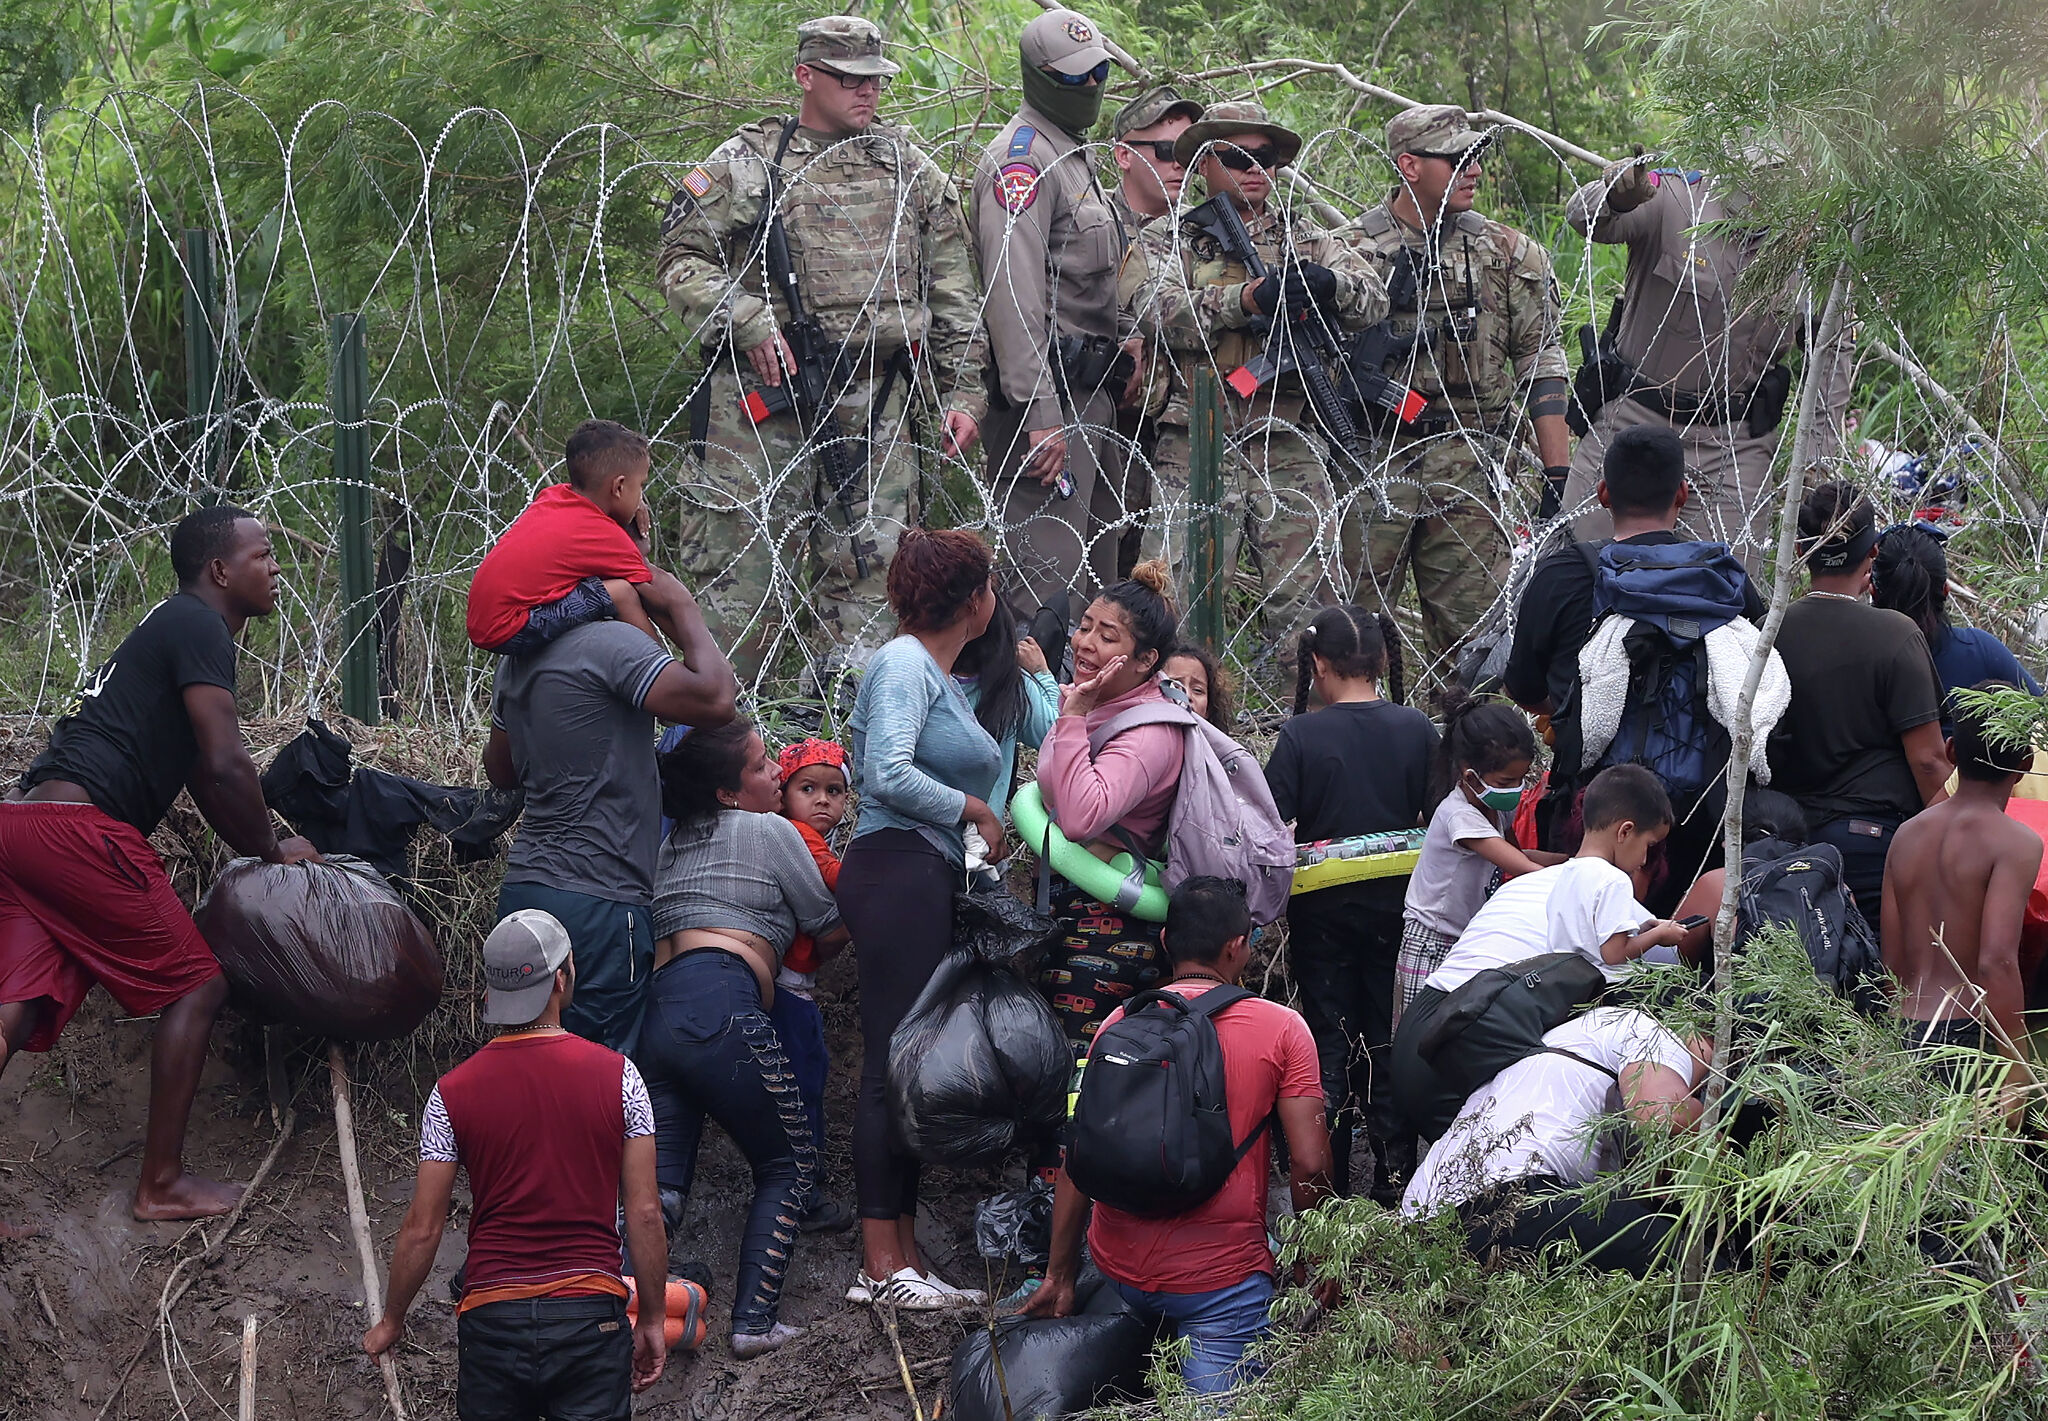 Claims of an open border are false and harmful